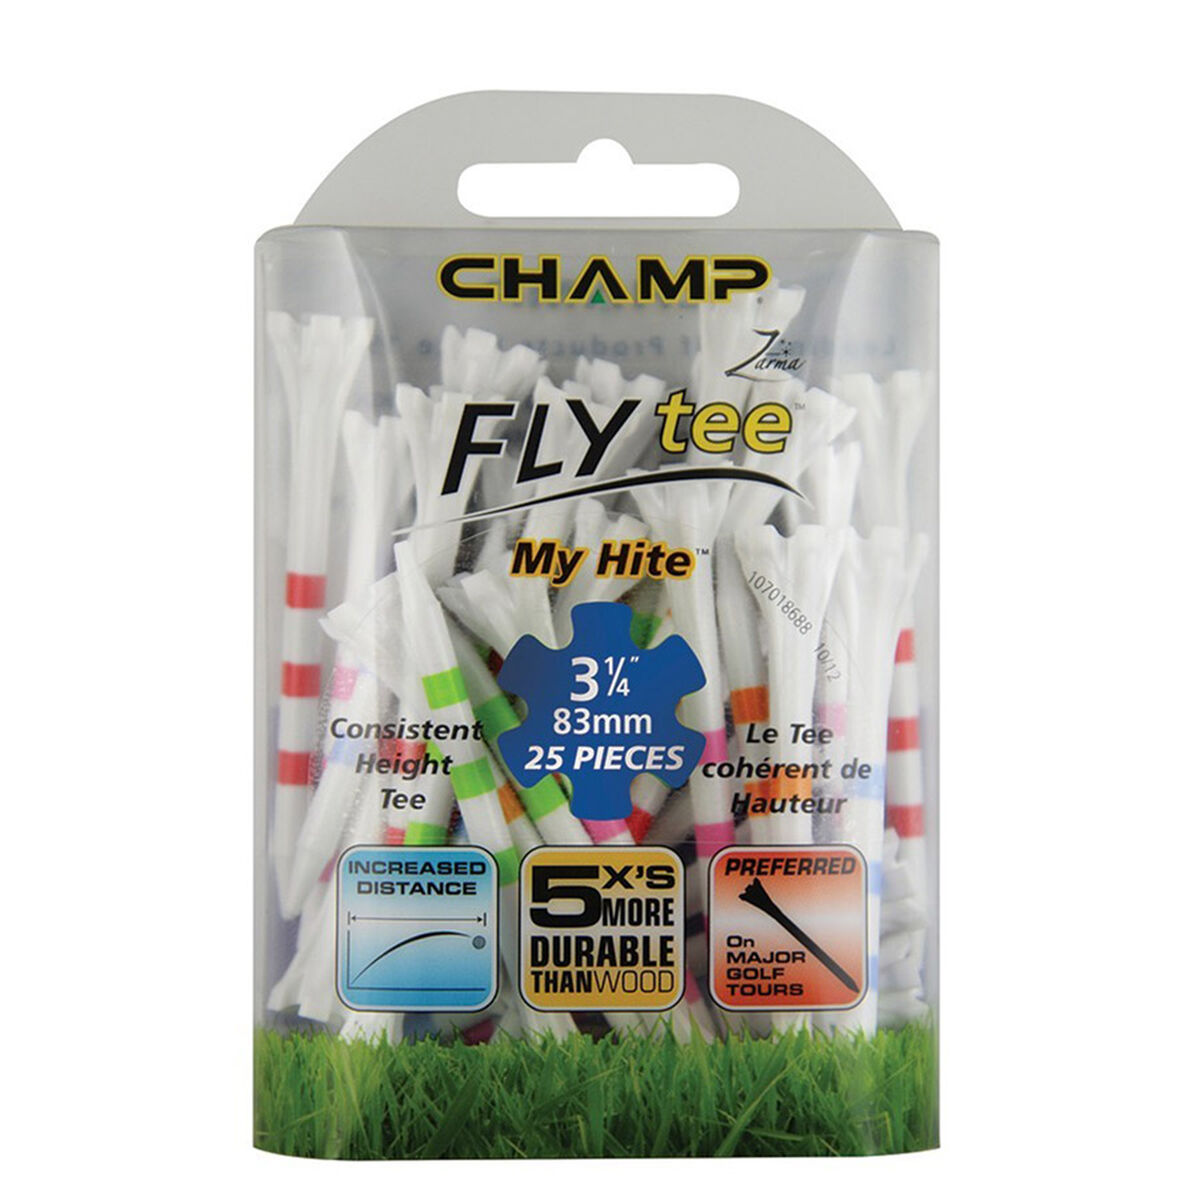 Champ White MyHite Fly Pack of 25 Golf Tees, Size: 83mm | American Golf von CHAMP